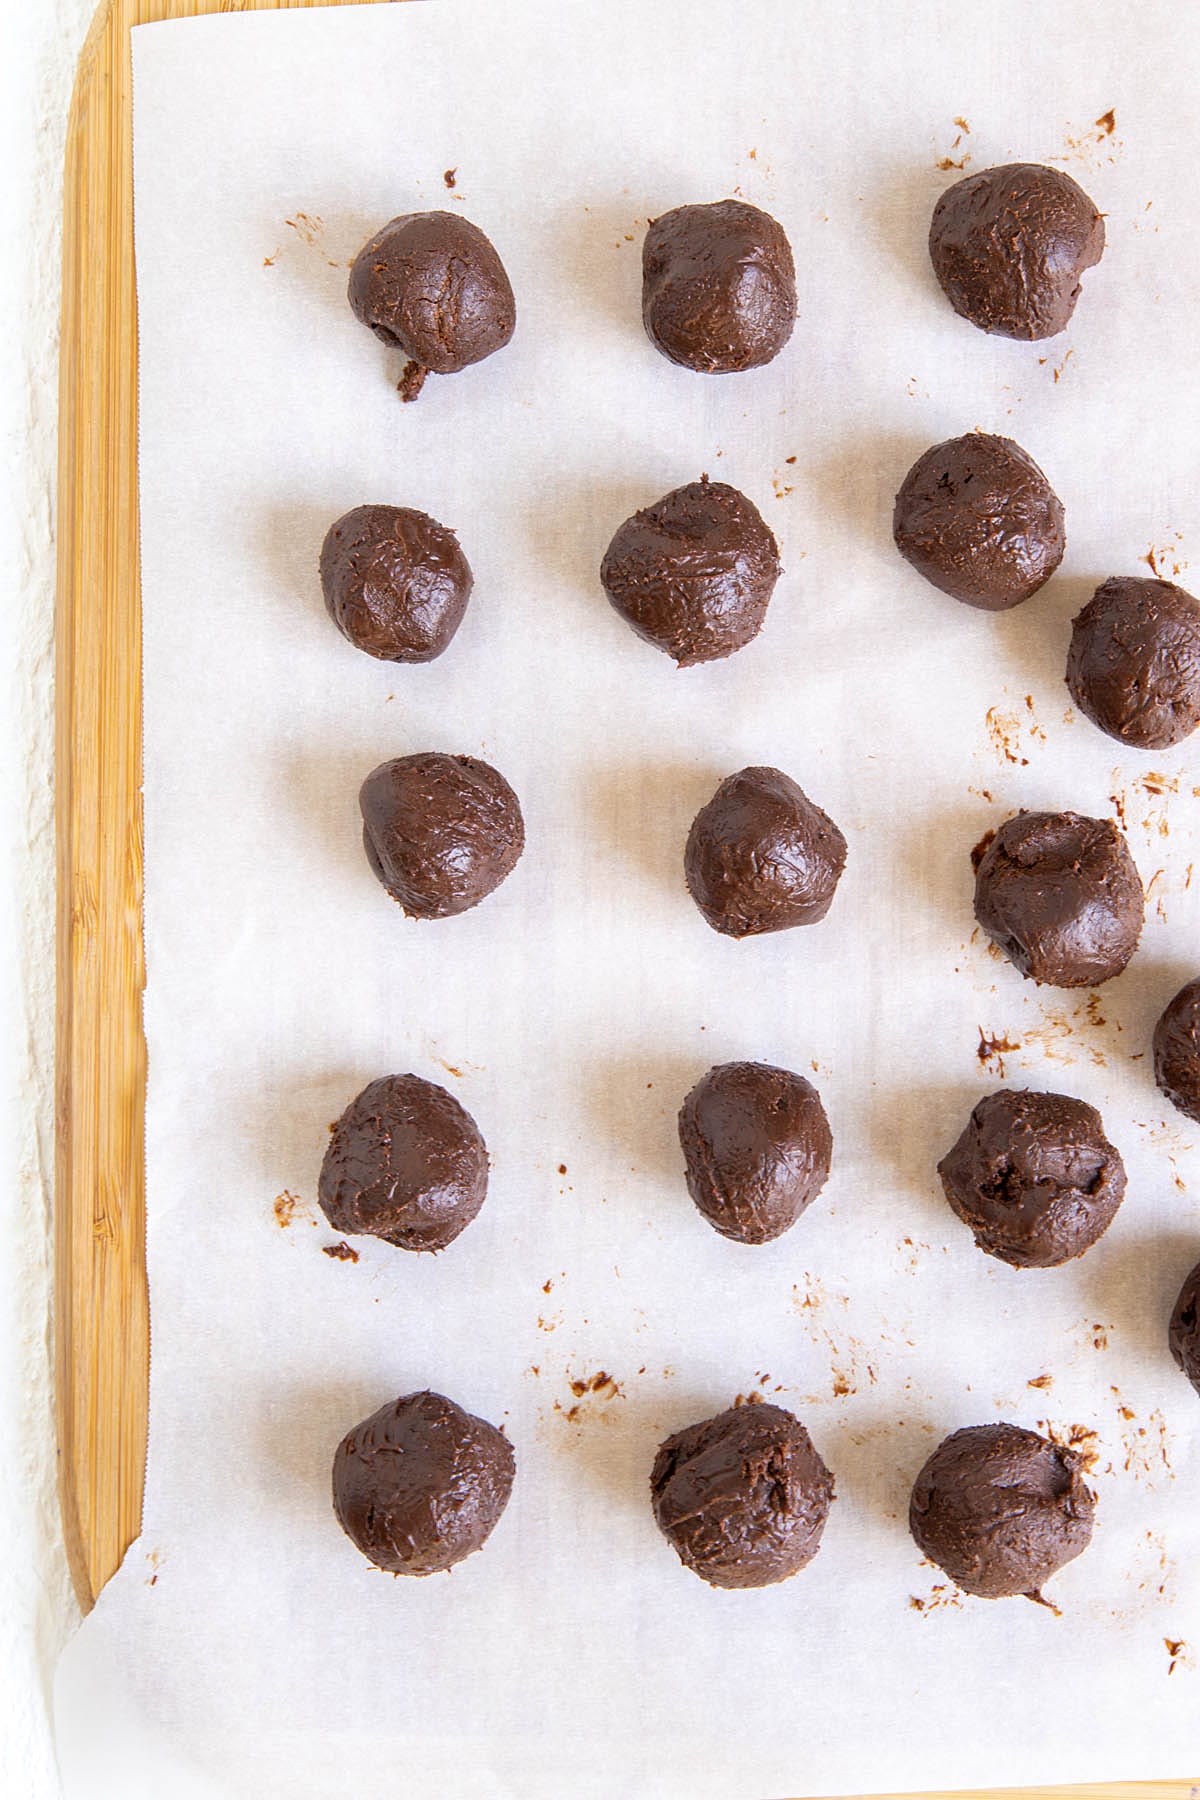 Chocolate truffles on parchment paper on a cutting board.